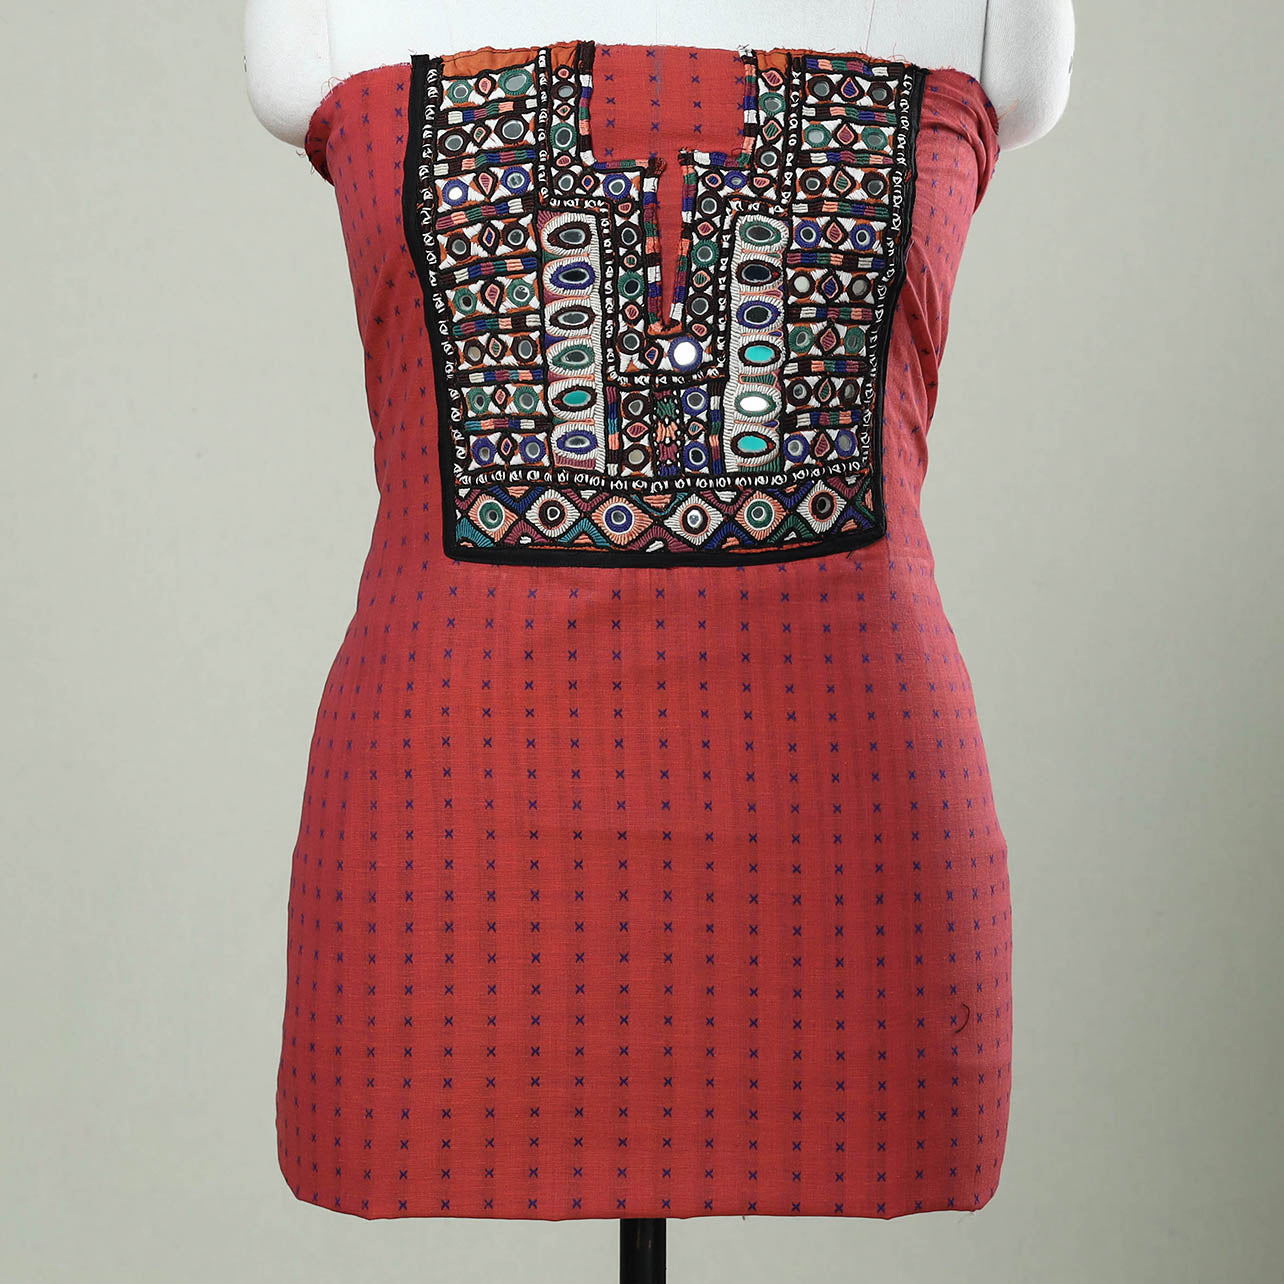 Exclusive! Kutch Embroidery Work Cotton Kurti Material - 2.5 Meter